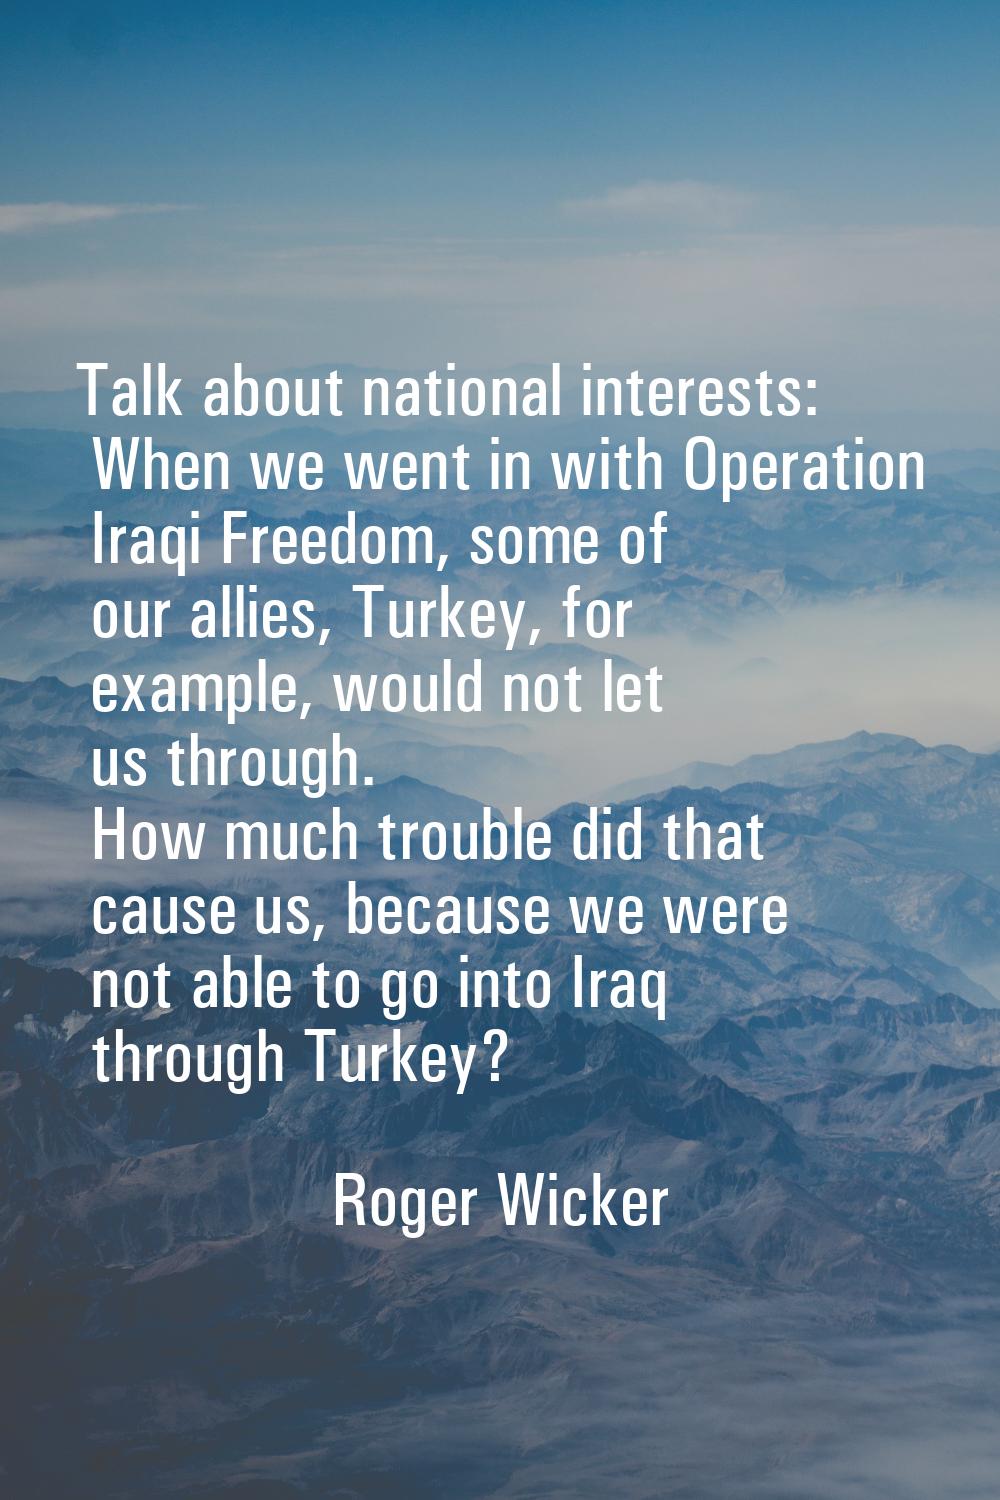 Talk about national interests: When we went in with Operation Iraqi Freedom, some of our allies, Tu